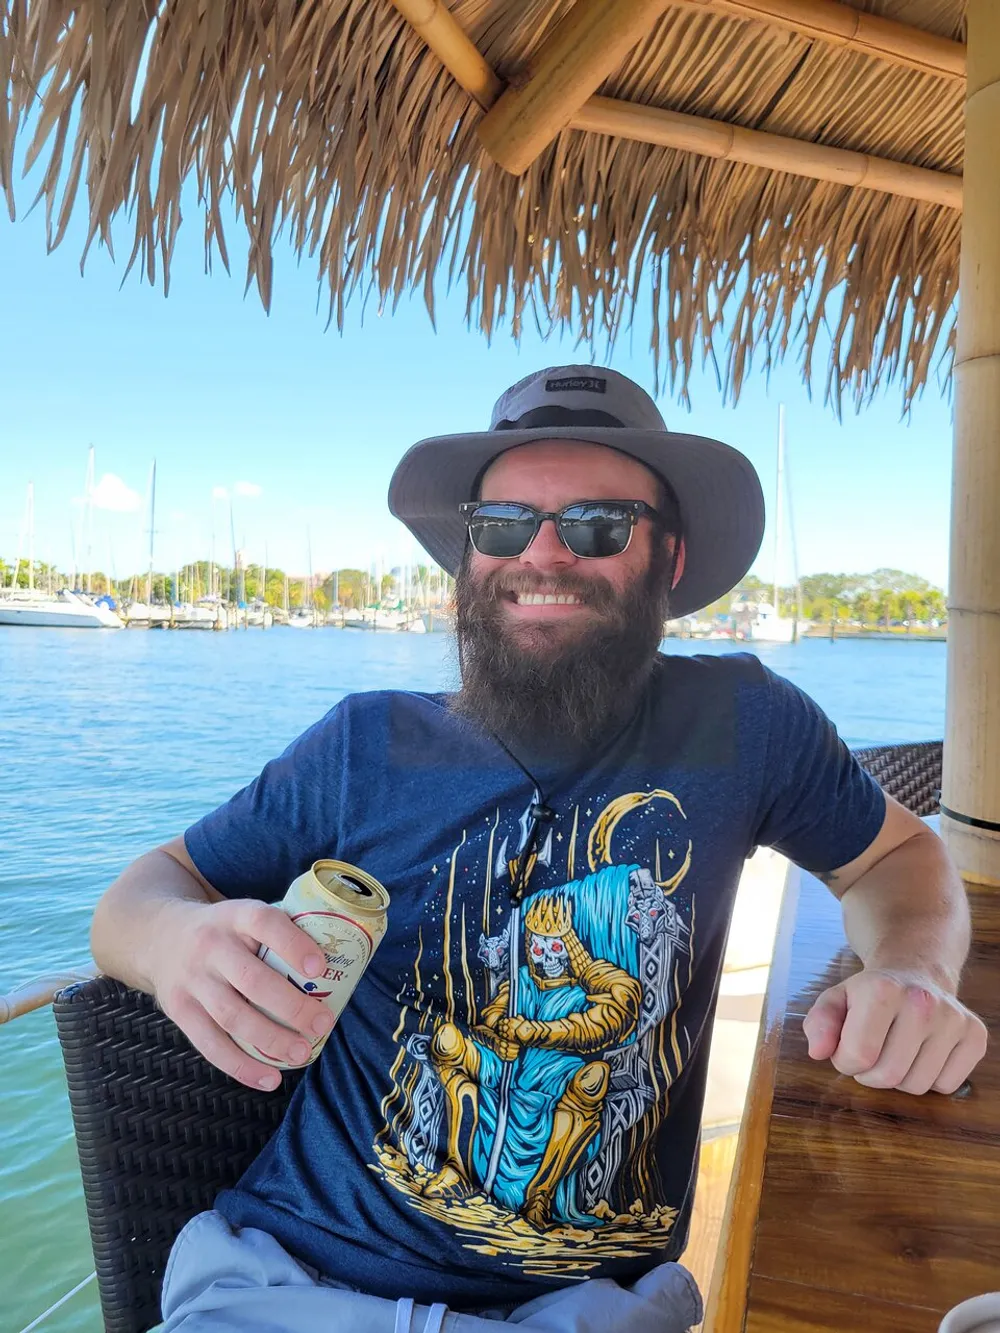 A smiling person wearing sunglasses a hat and a graphic t-shirt is sitting under a thatched roof with a drink overlooking a marina with boats